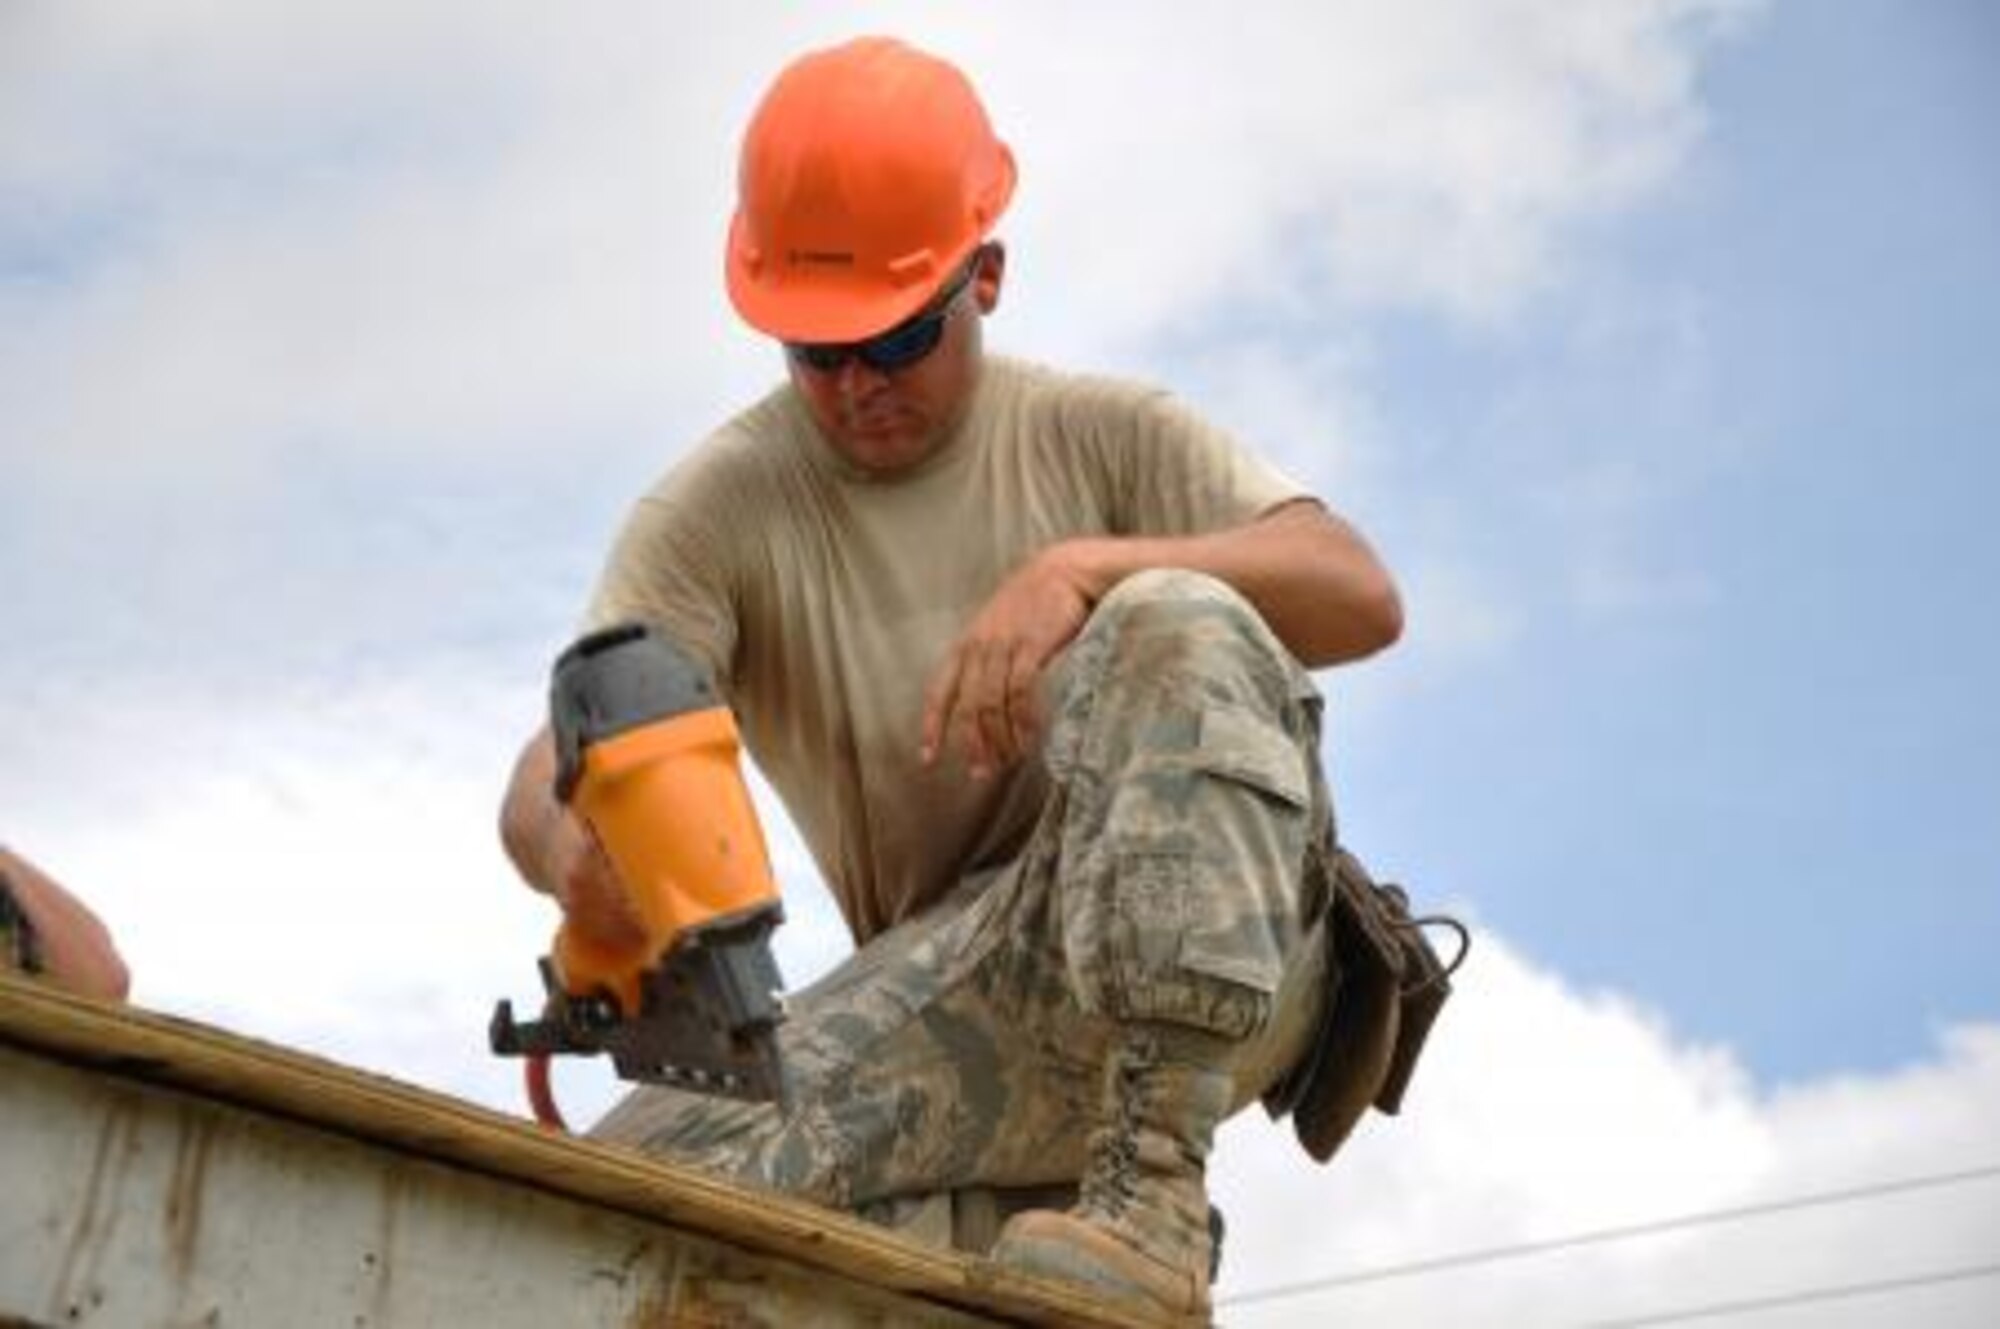 U.S. Air Force Staff Sgt. John McAllister, structures craft lead for Crooked Tree Government Primary School from the 823rd RED HORSE Squadron, uses a nail gun to install roof decking to repair a roof at Hattieville Government Pre-School June 4, 2013, as part of an exercise called New Horizons. Using excess building materials, the civil engineers plan to repair the leaky roof. Civil Engineers from both the U.S. and Belize are constructing various structures at schools throughout Belize as part of an exercise called New Horizons. Building these facilities will support further education for the children of the country and provide valuable training for U.S. and Belizean service members. (U.S. Air Force photo/Capt. Holly Hess)
